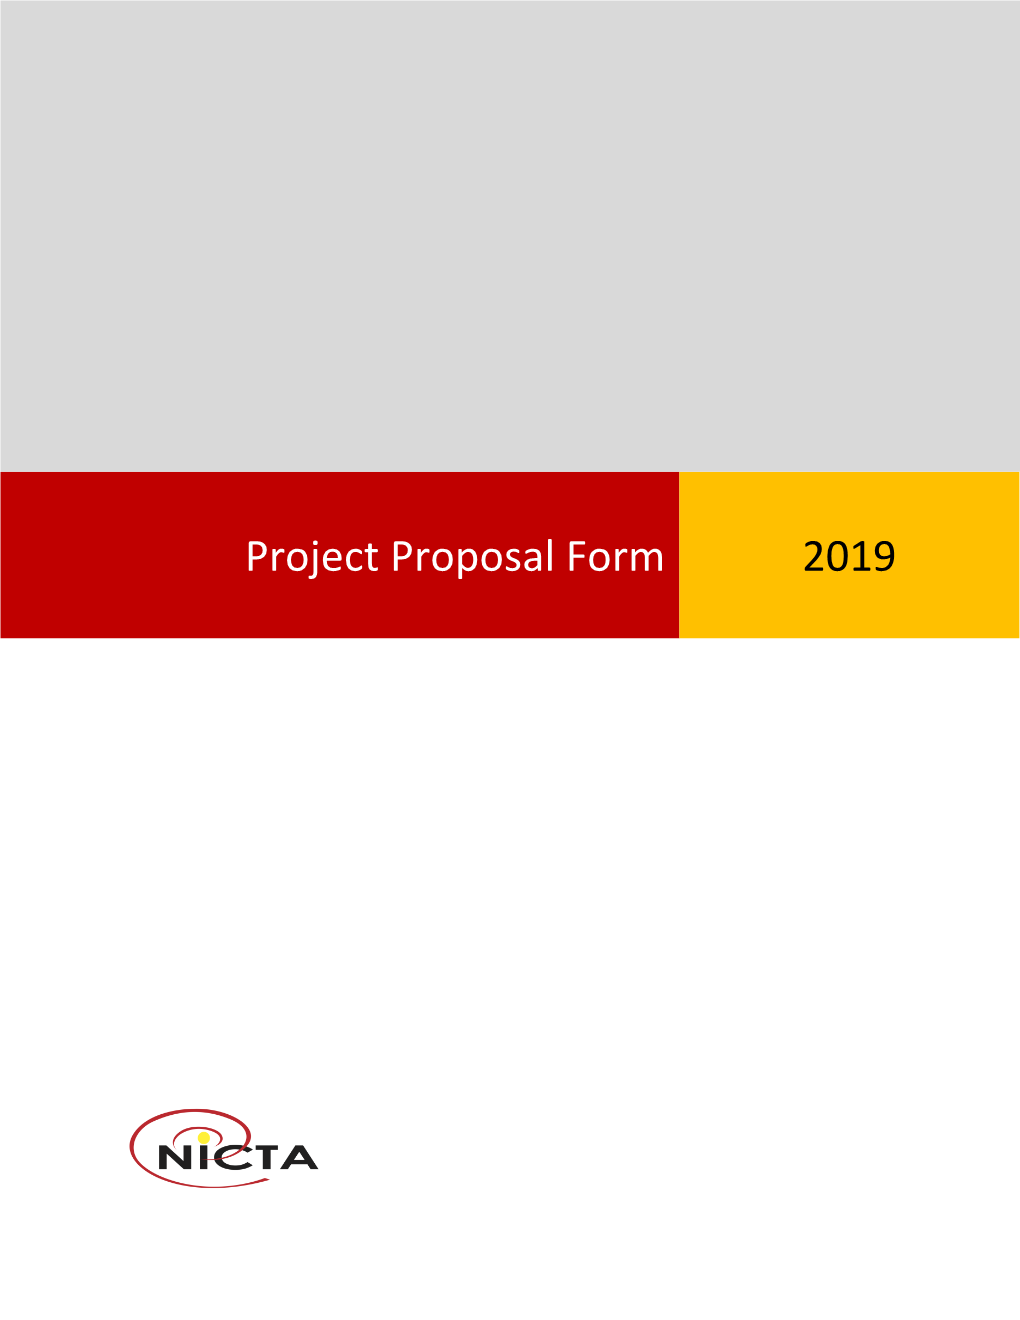 Project Proposal Form 2019